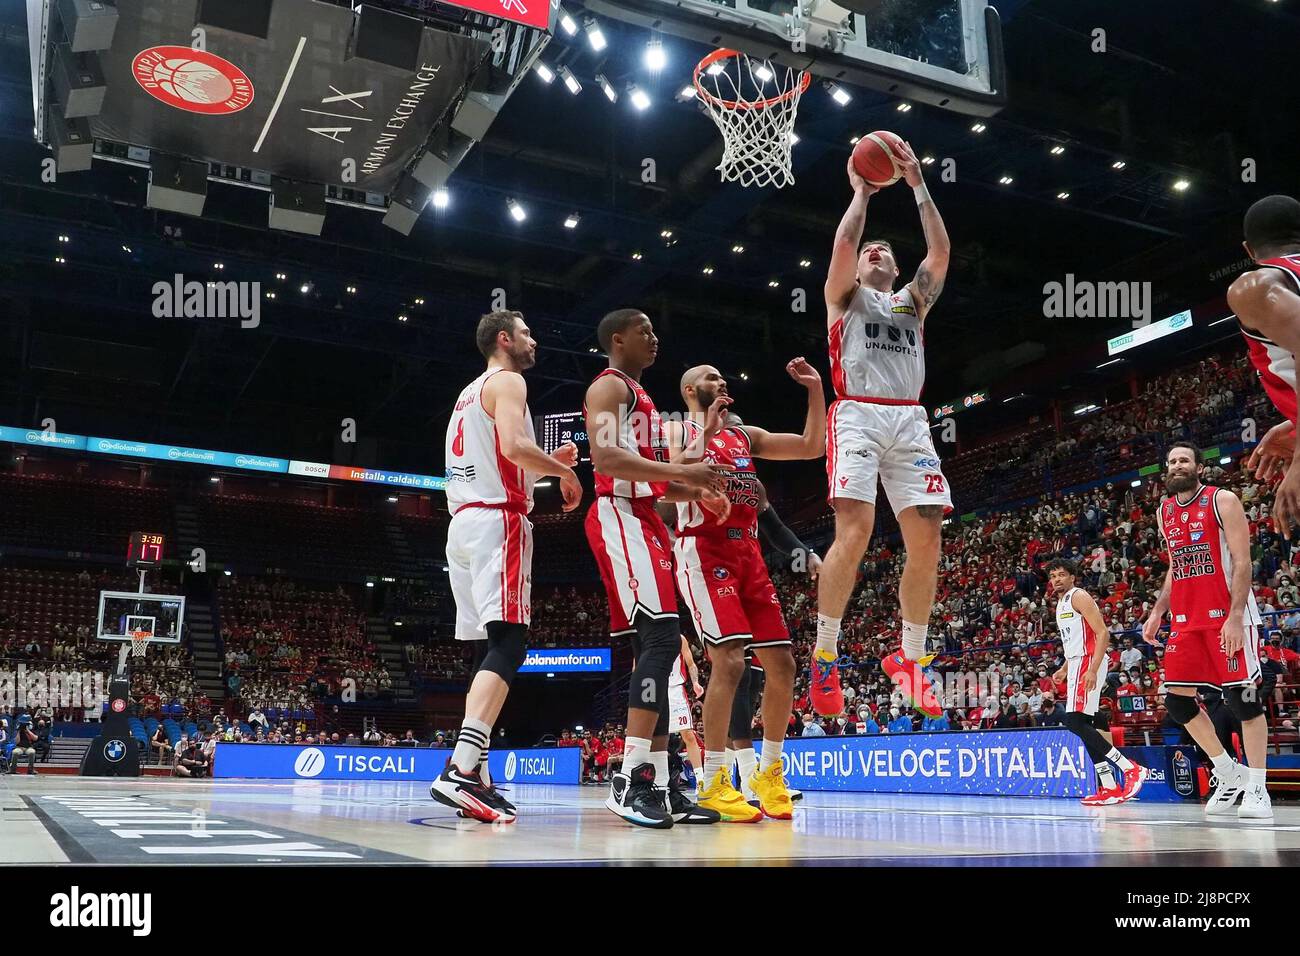 Milan, Italy. 17th May, 2022. OLYMPUS DIGITAL CAMERA during Playoff - AX  Armani Exchange Milano vs Unahotels Reggio Emilia, Italian Basketball A  Serie Championship in Milan, Italy, May 17 2022 Credit: Independent